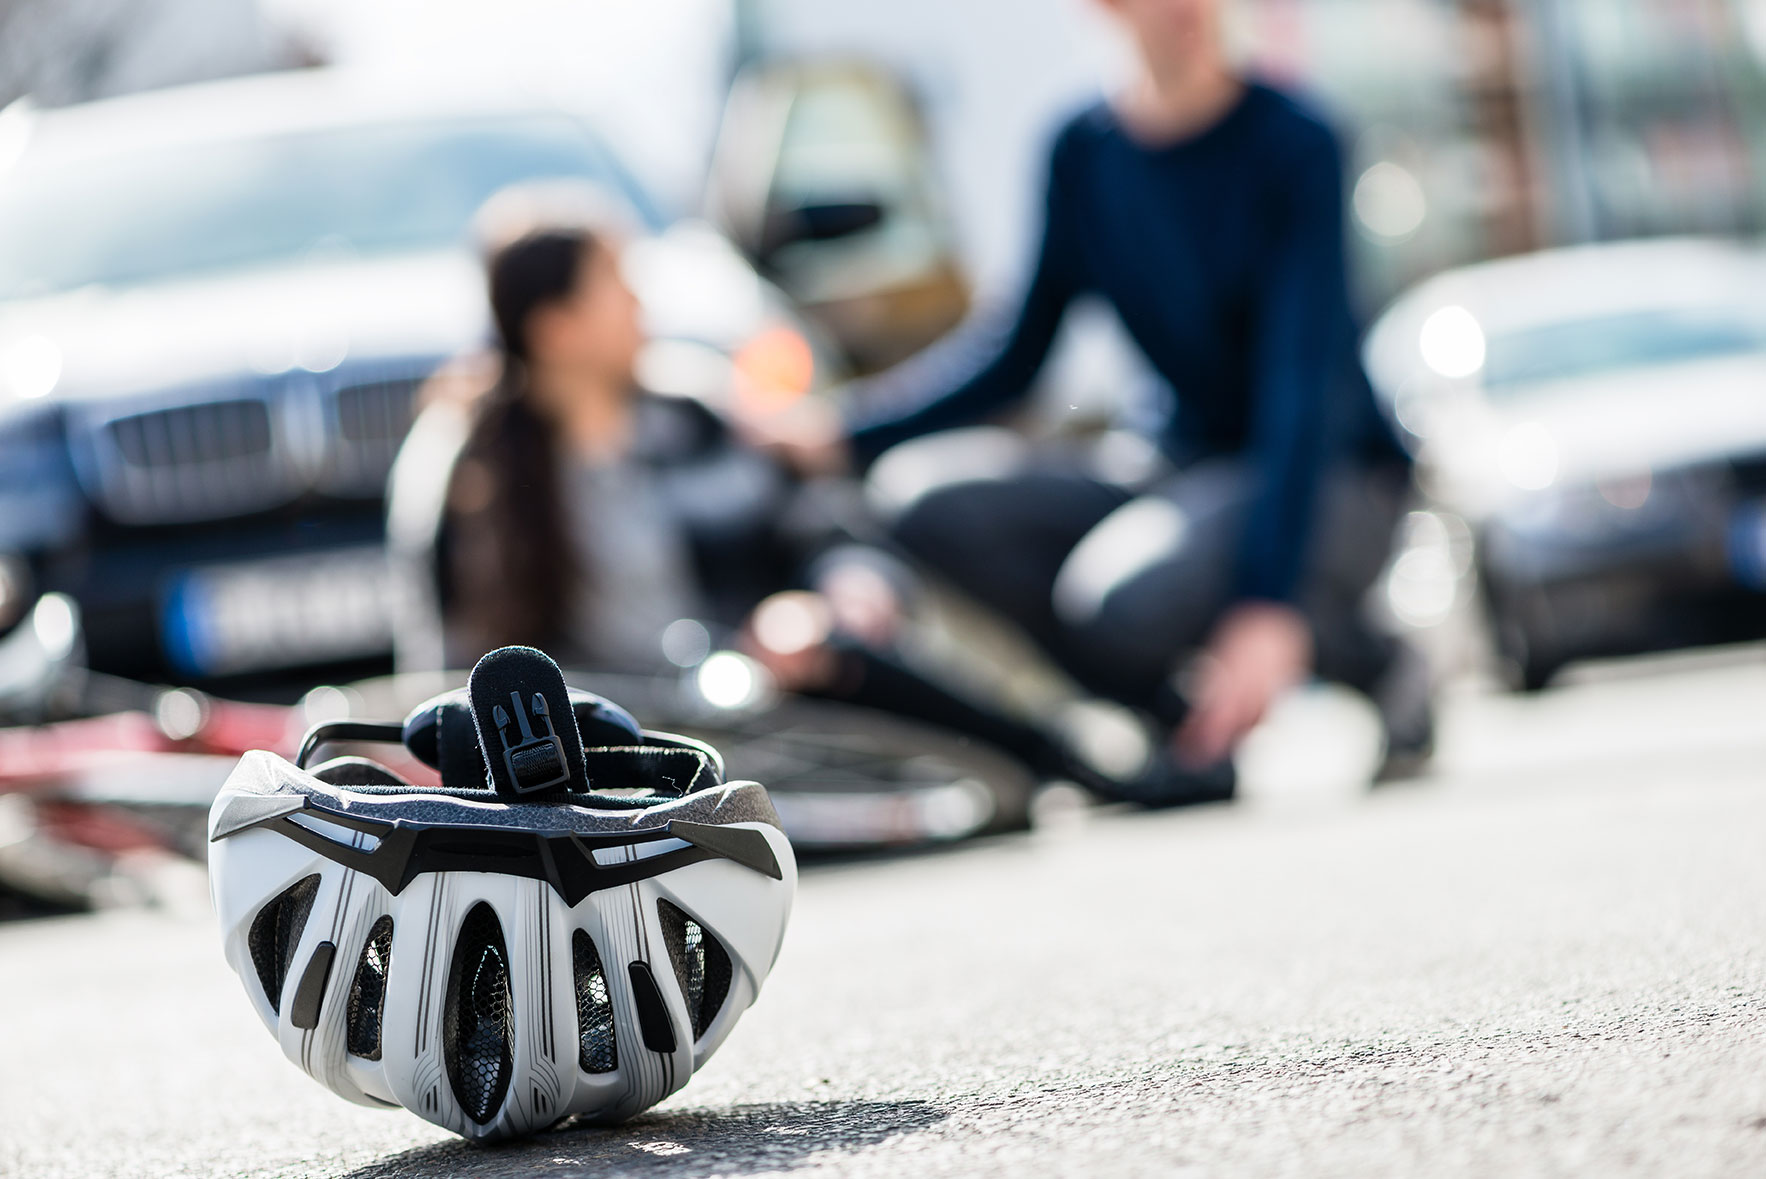 Bike Accident and Injury Risks in NYC